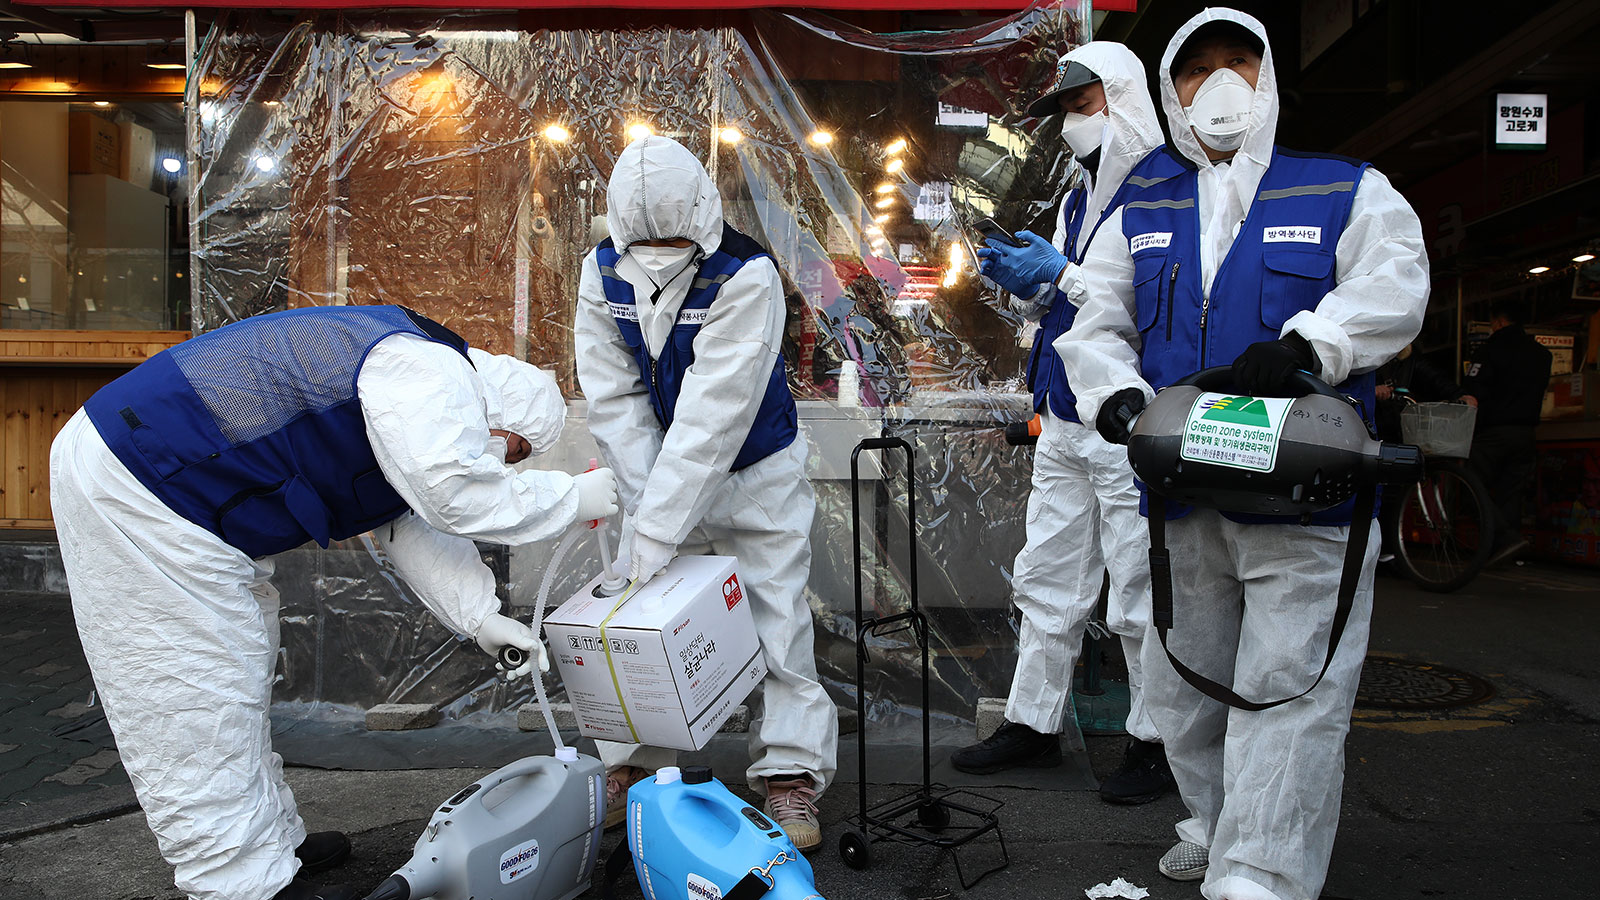 Disinfection workers wearing protective gear prepare to disinfect against the coronavirus at a market in Seoul, South Korea.